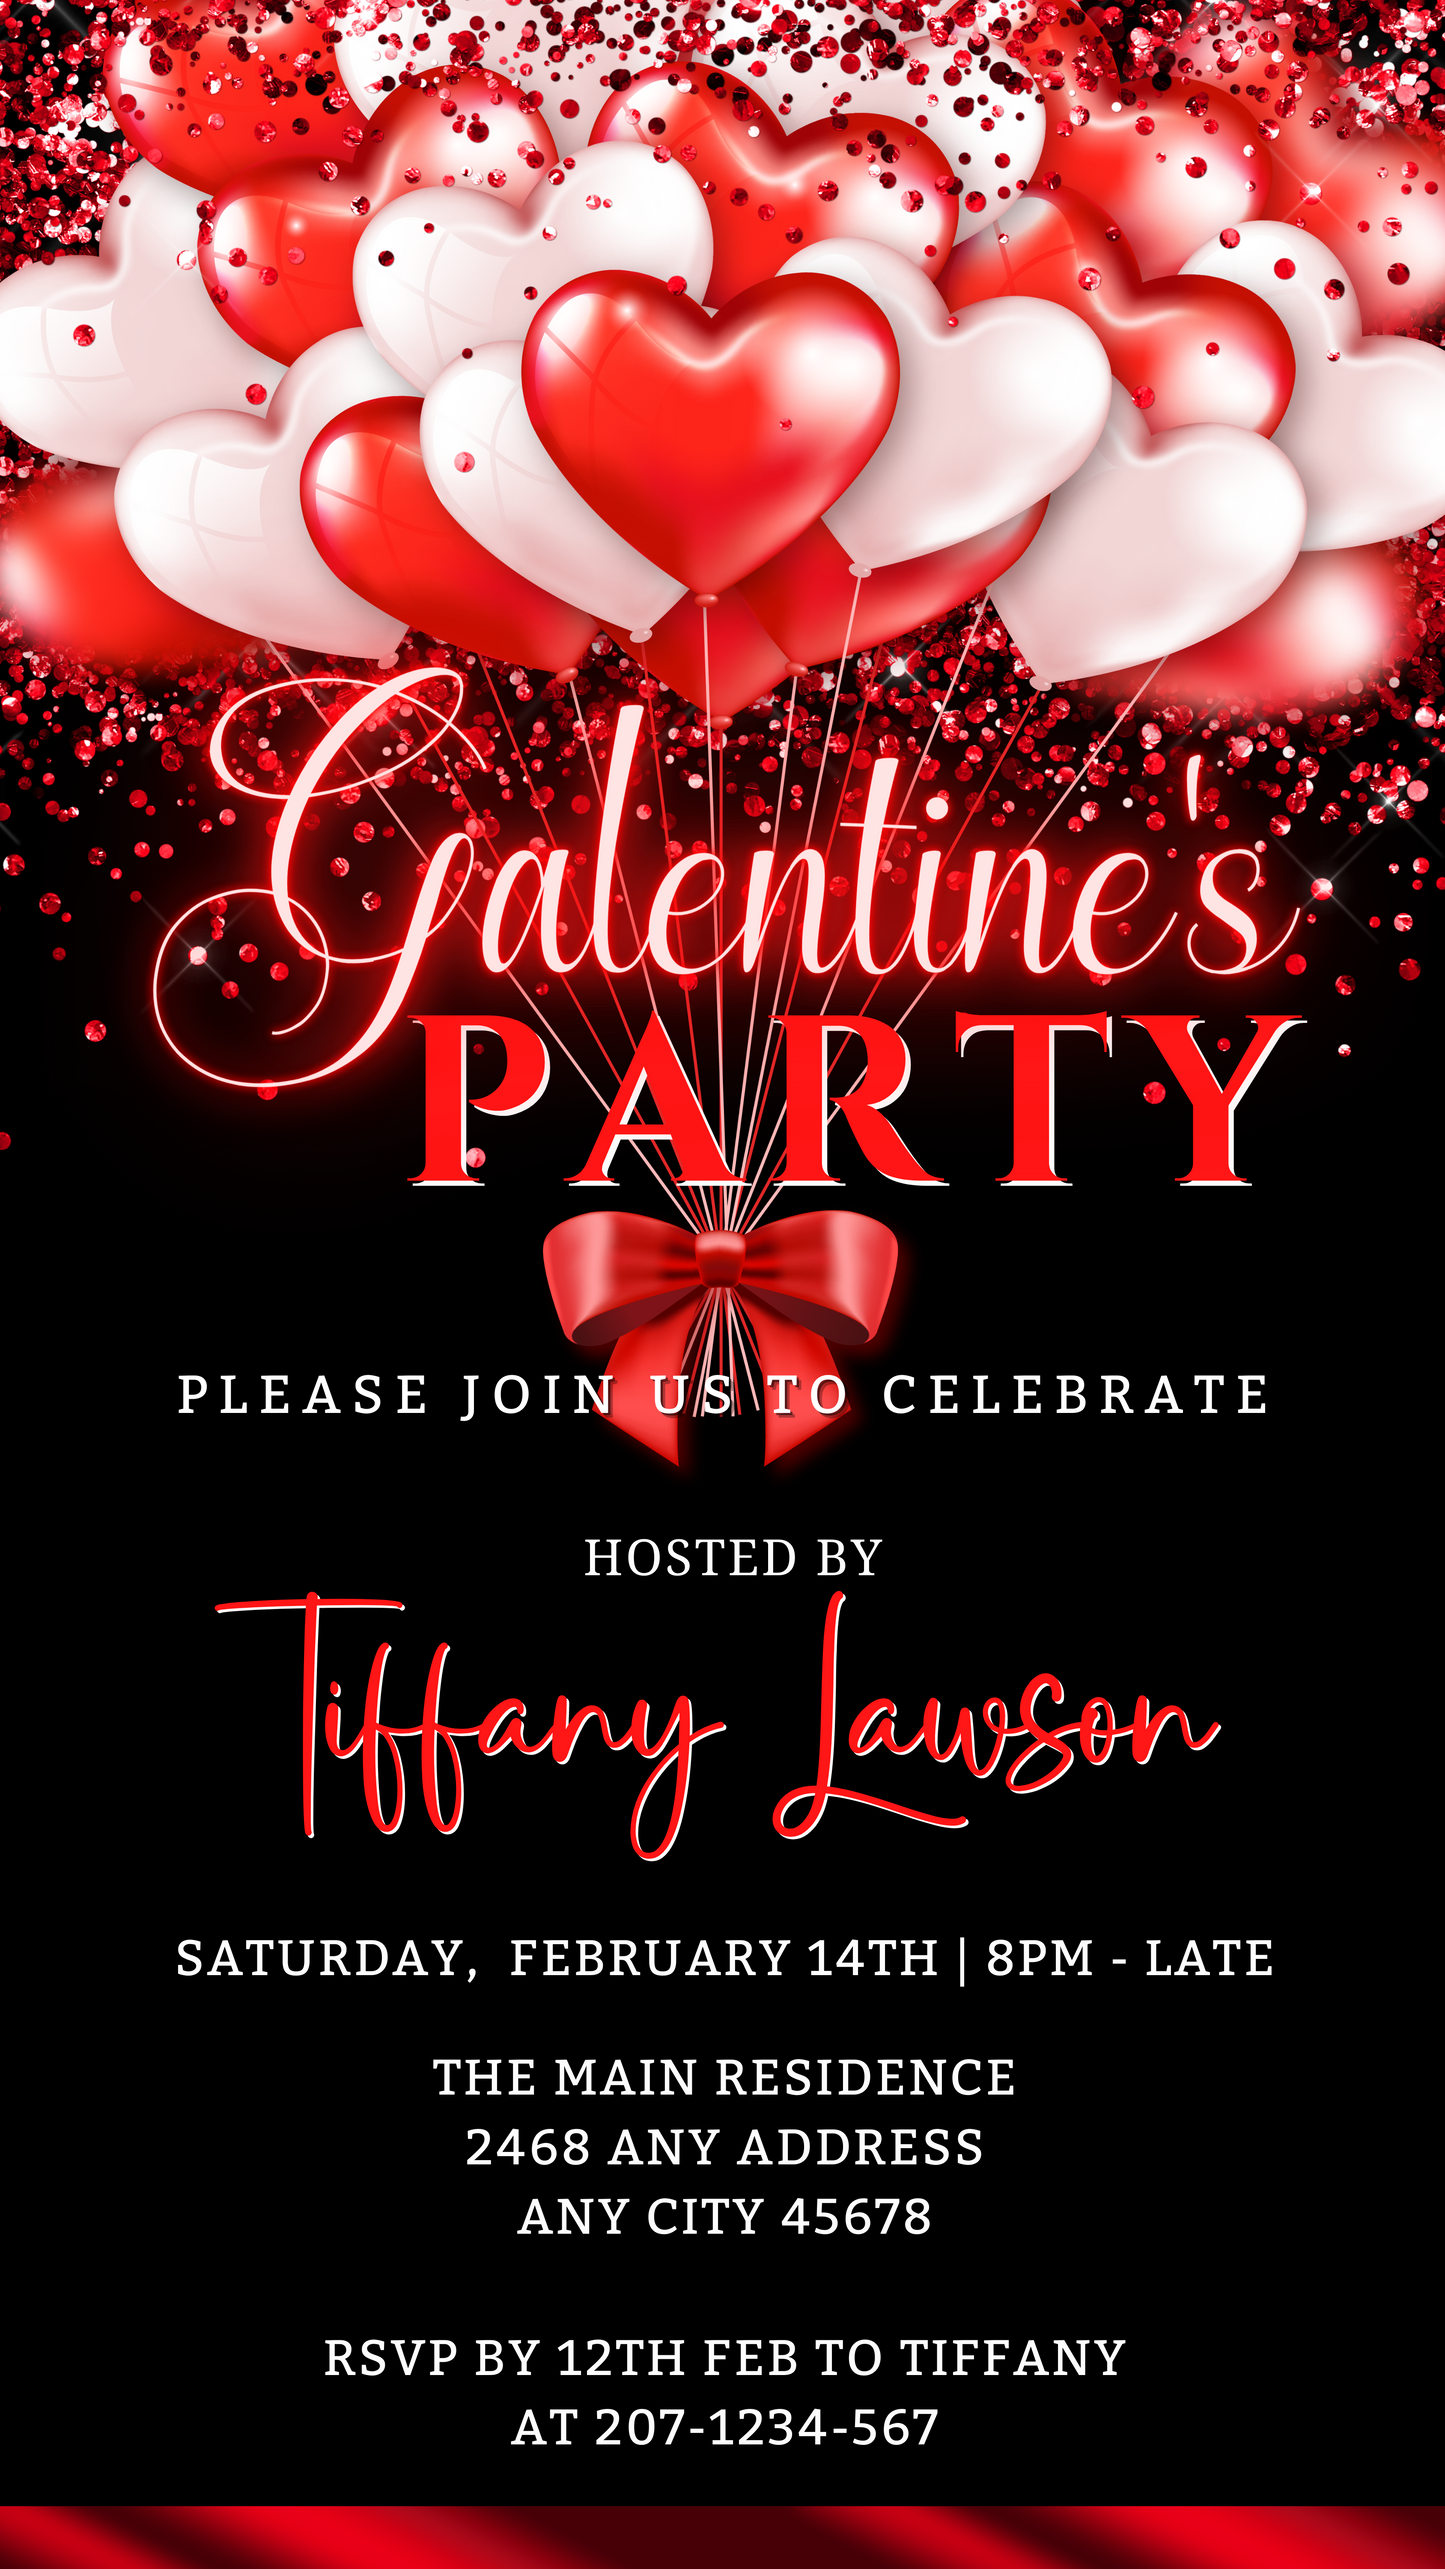 Neon Red White Hearty Balloons | Galentines Party Evite featuring red and white balloons with a bow and confetti, customizable via Canva for digital invitations.